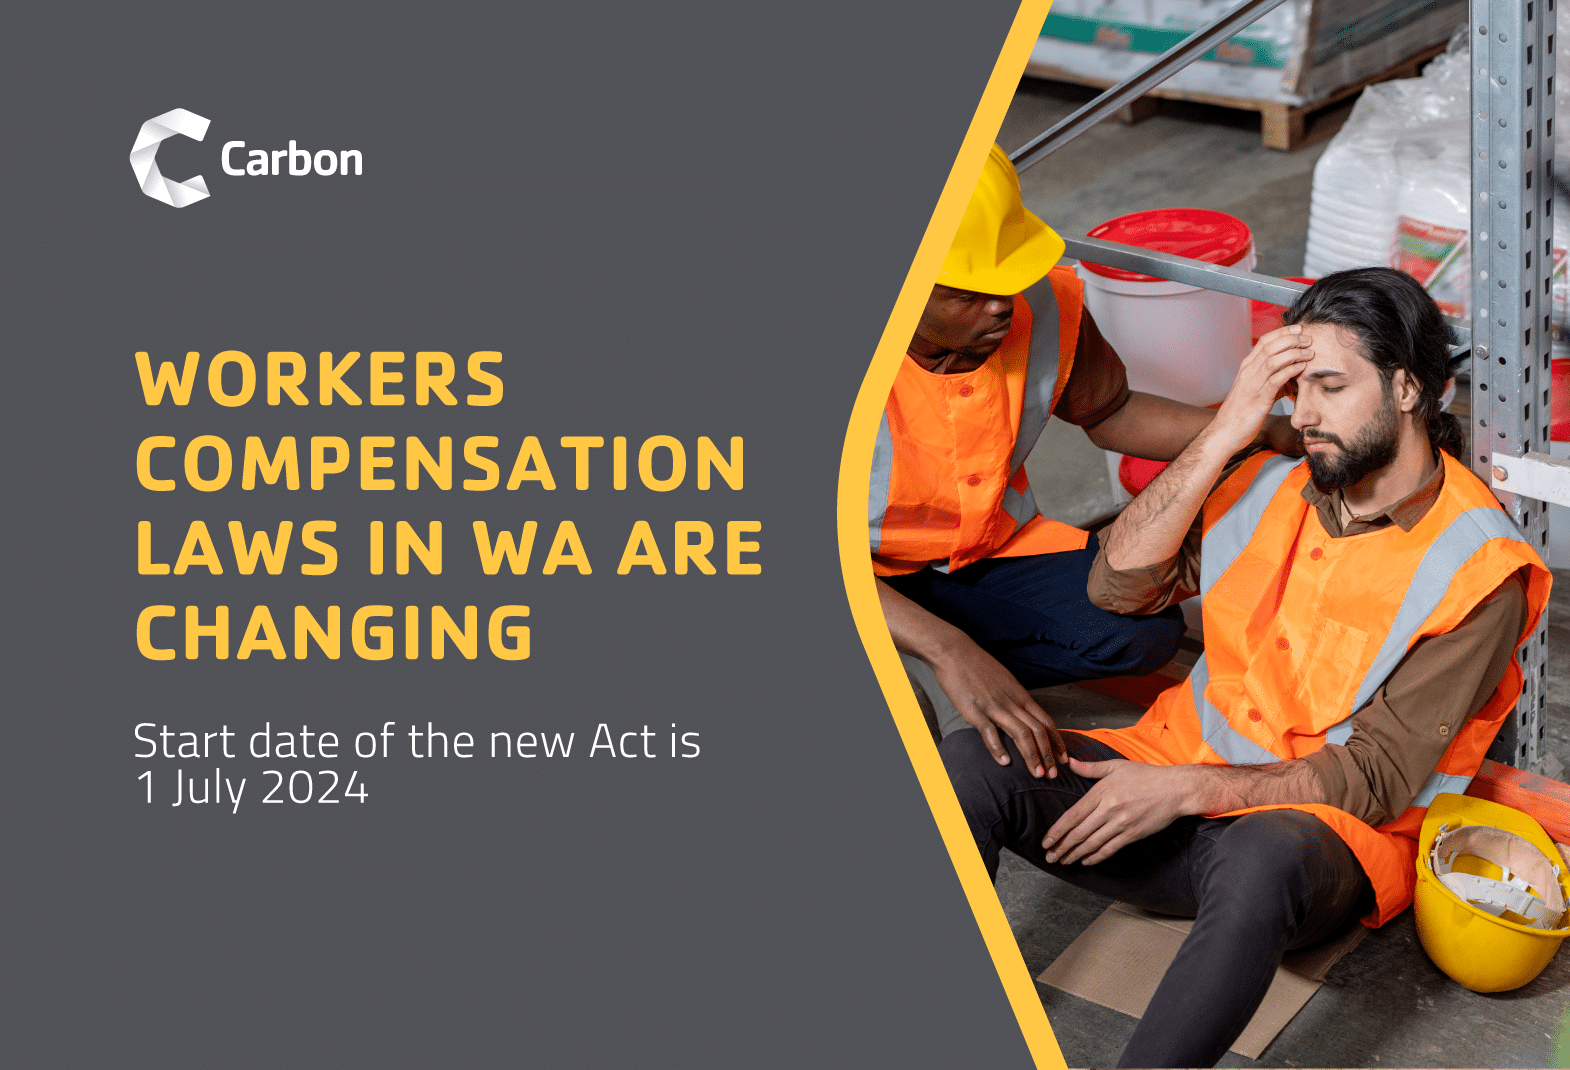 Workers Compensation Laws in WA are Changing – 1 July 2024